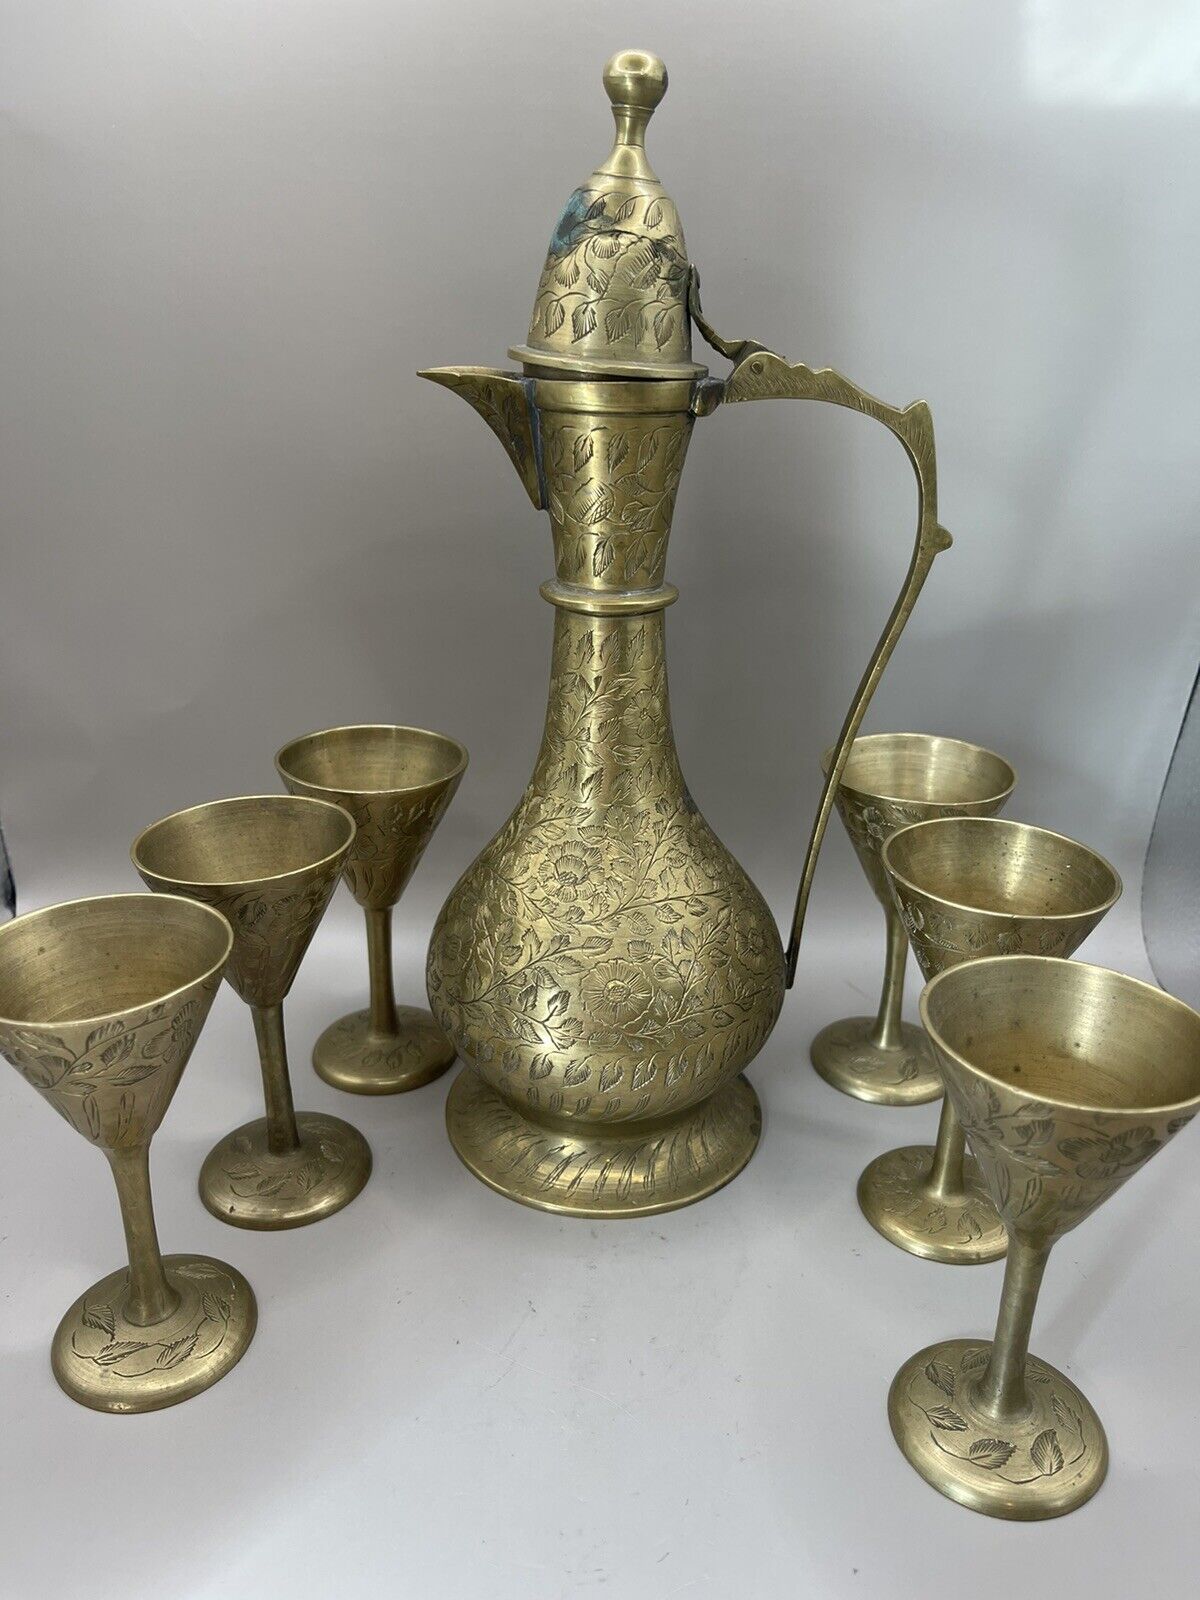 Vintage Brass Dallah Middle Eastern Tea/Coffee Pot Eched India W/6 Cups Engraved